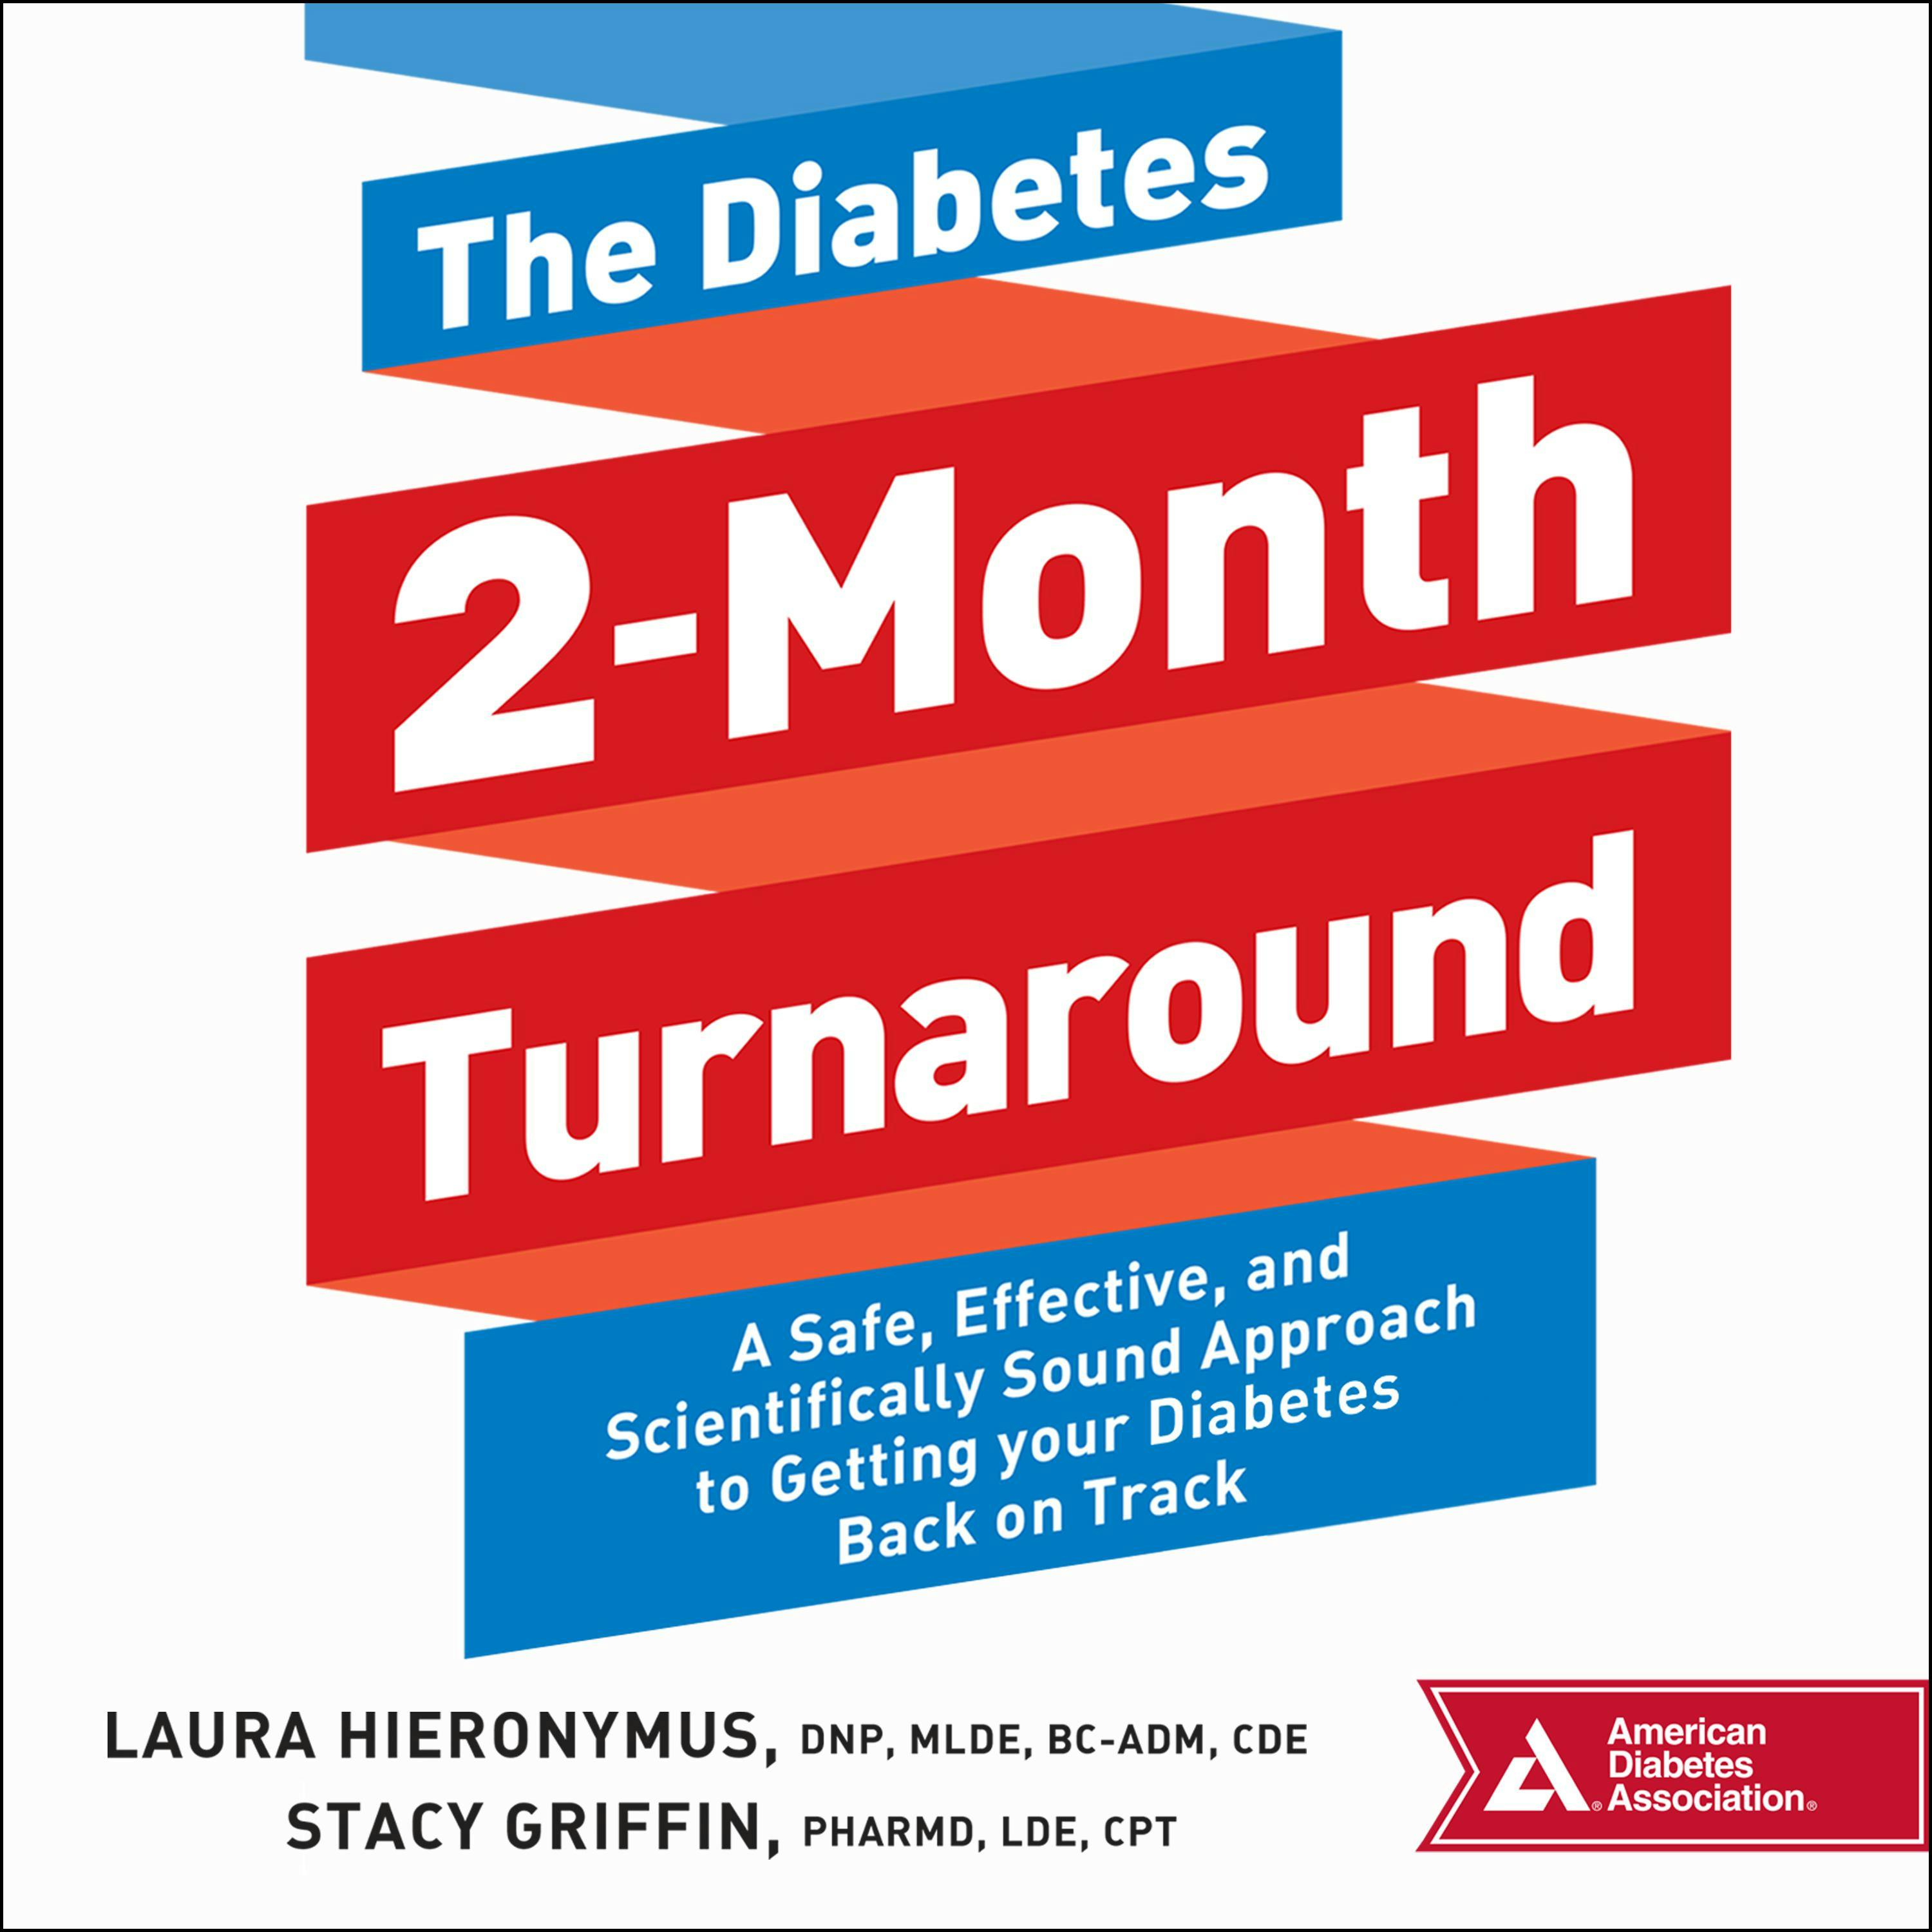 The Diabetes 2-Month Turnaround: A Safe, Effective, and Scientifically Sound Approach to Getting Your Diabetes Back On Track - CPT, BC-ADM